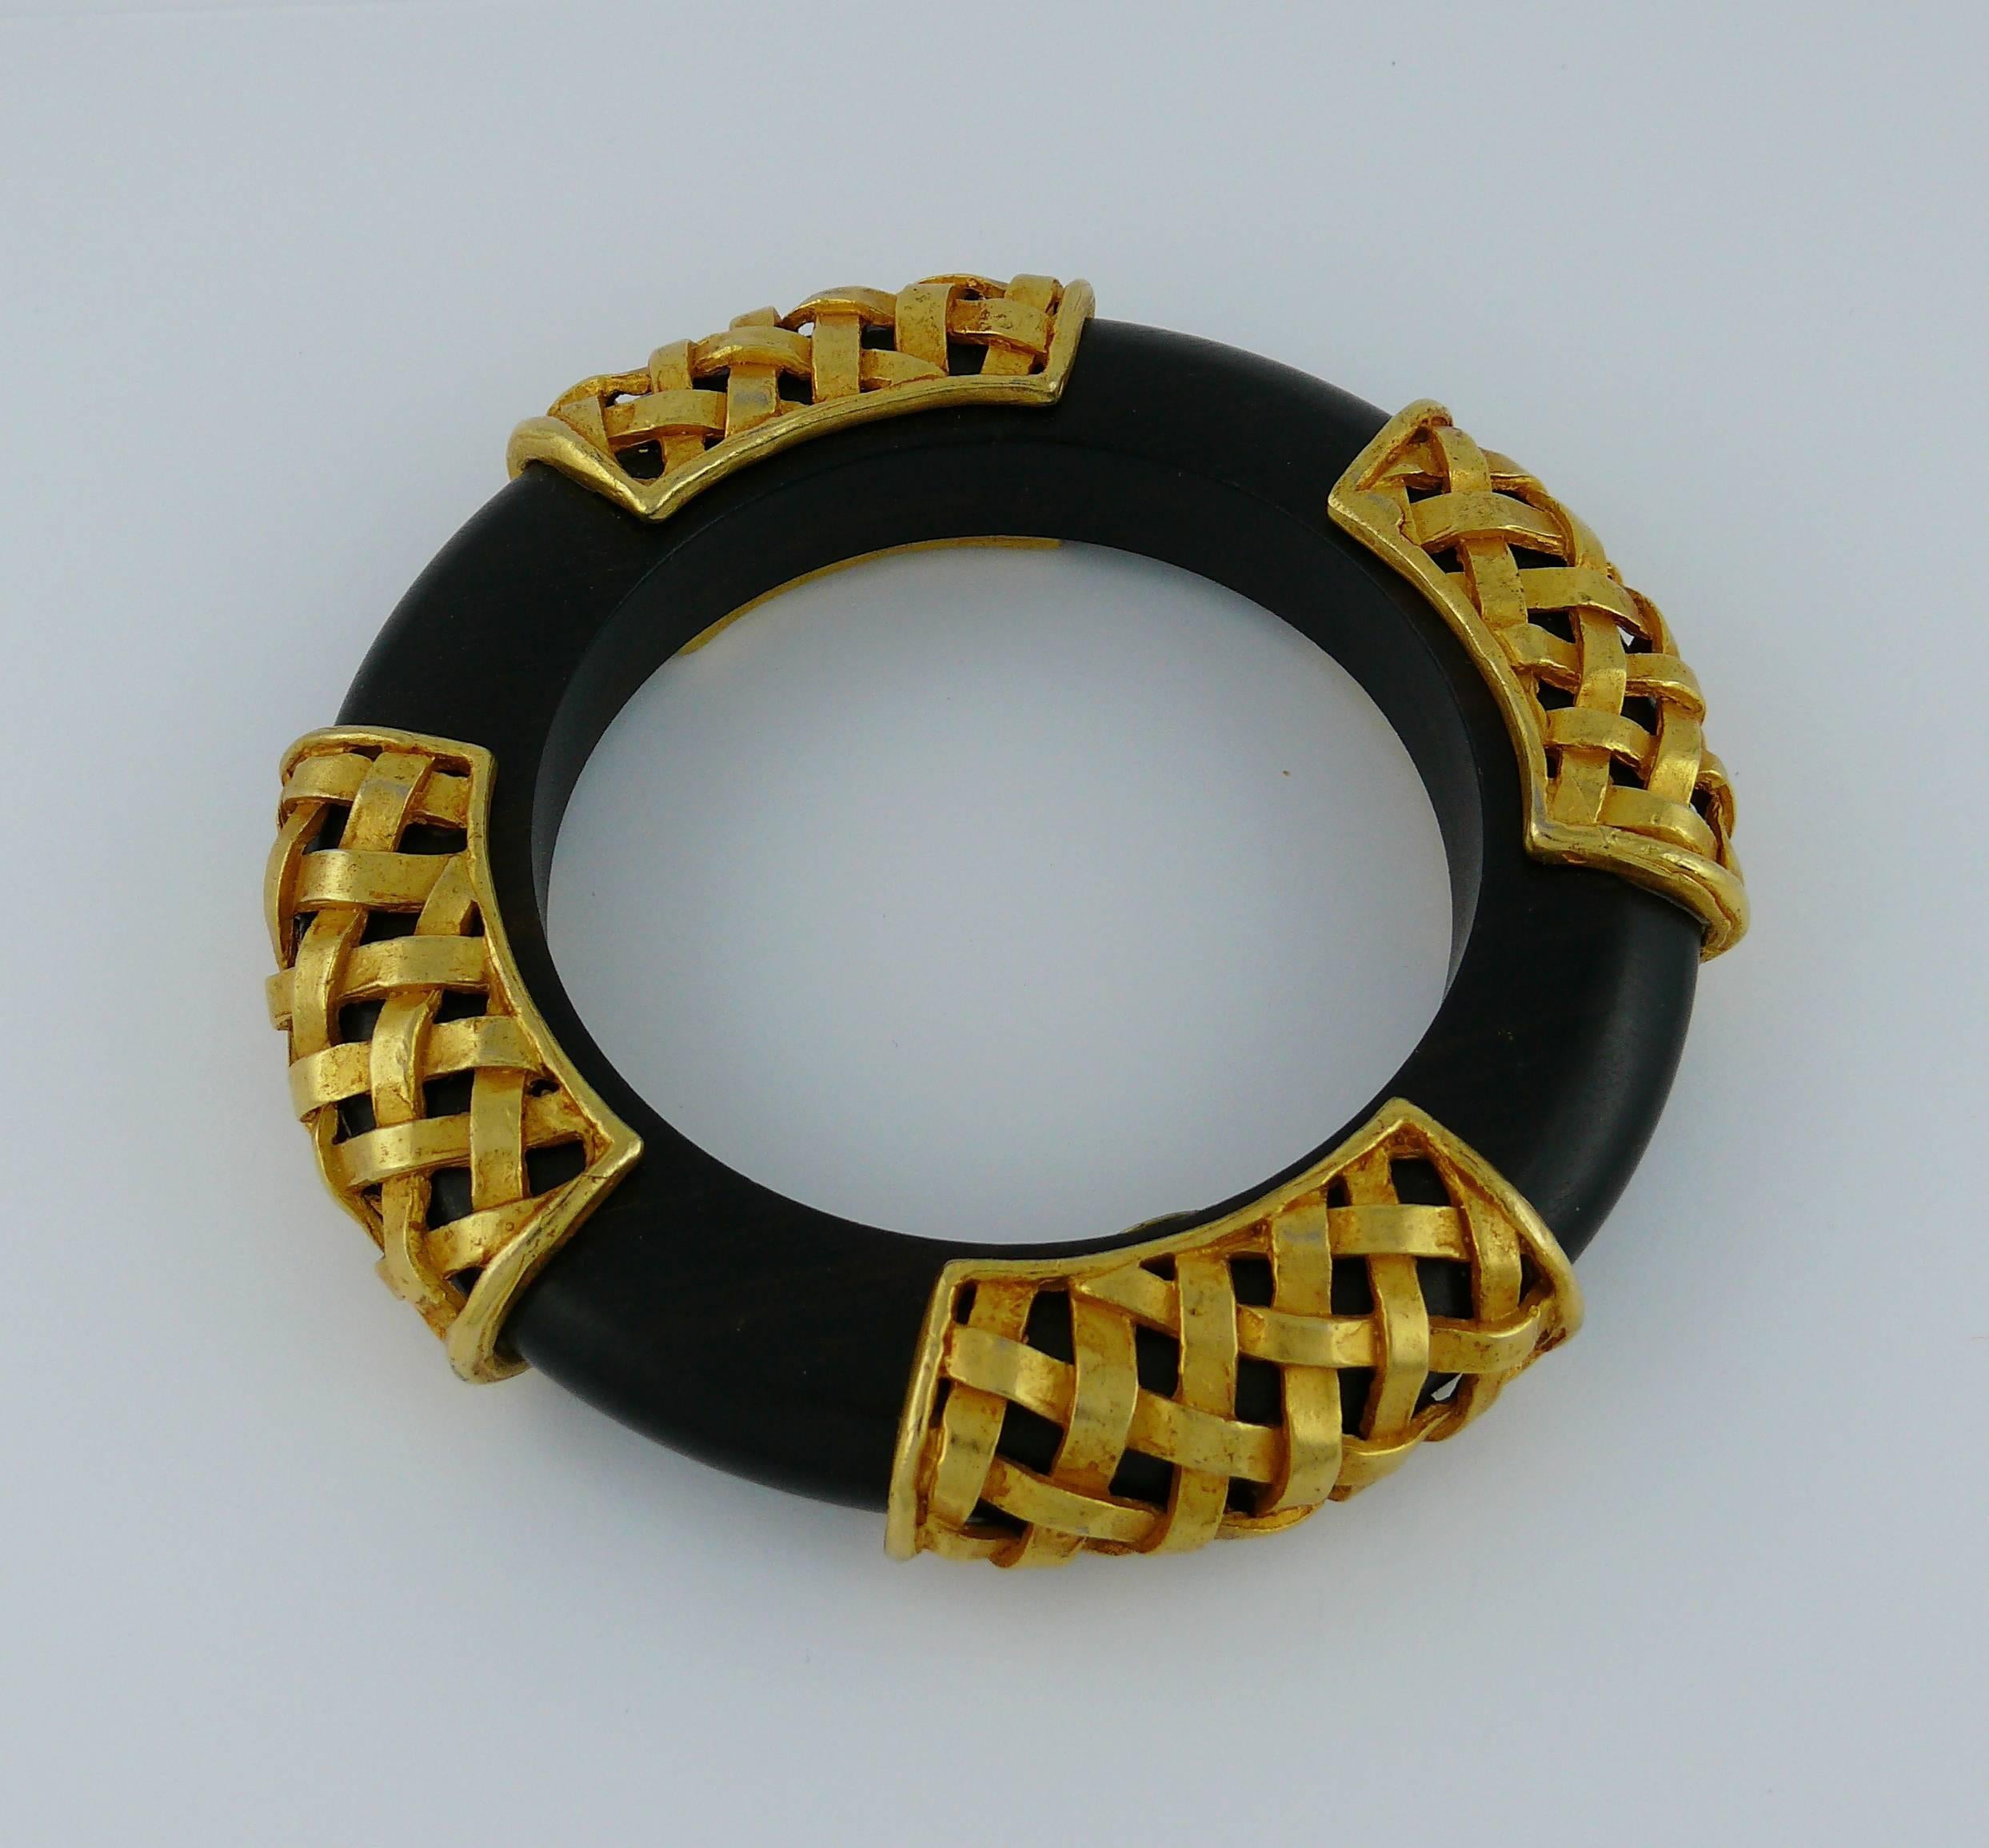 DOMINIQUE AURIENTIS vintage massive wooden bangle decorated with four braided gold-tone caps.

Marked DOMINIQUE AURIENTIS Paris.

Indicative measurements : inner circumference approx. 19.79 cm (7.79 inches) / width approx. 1.2 cm (0.47